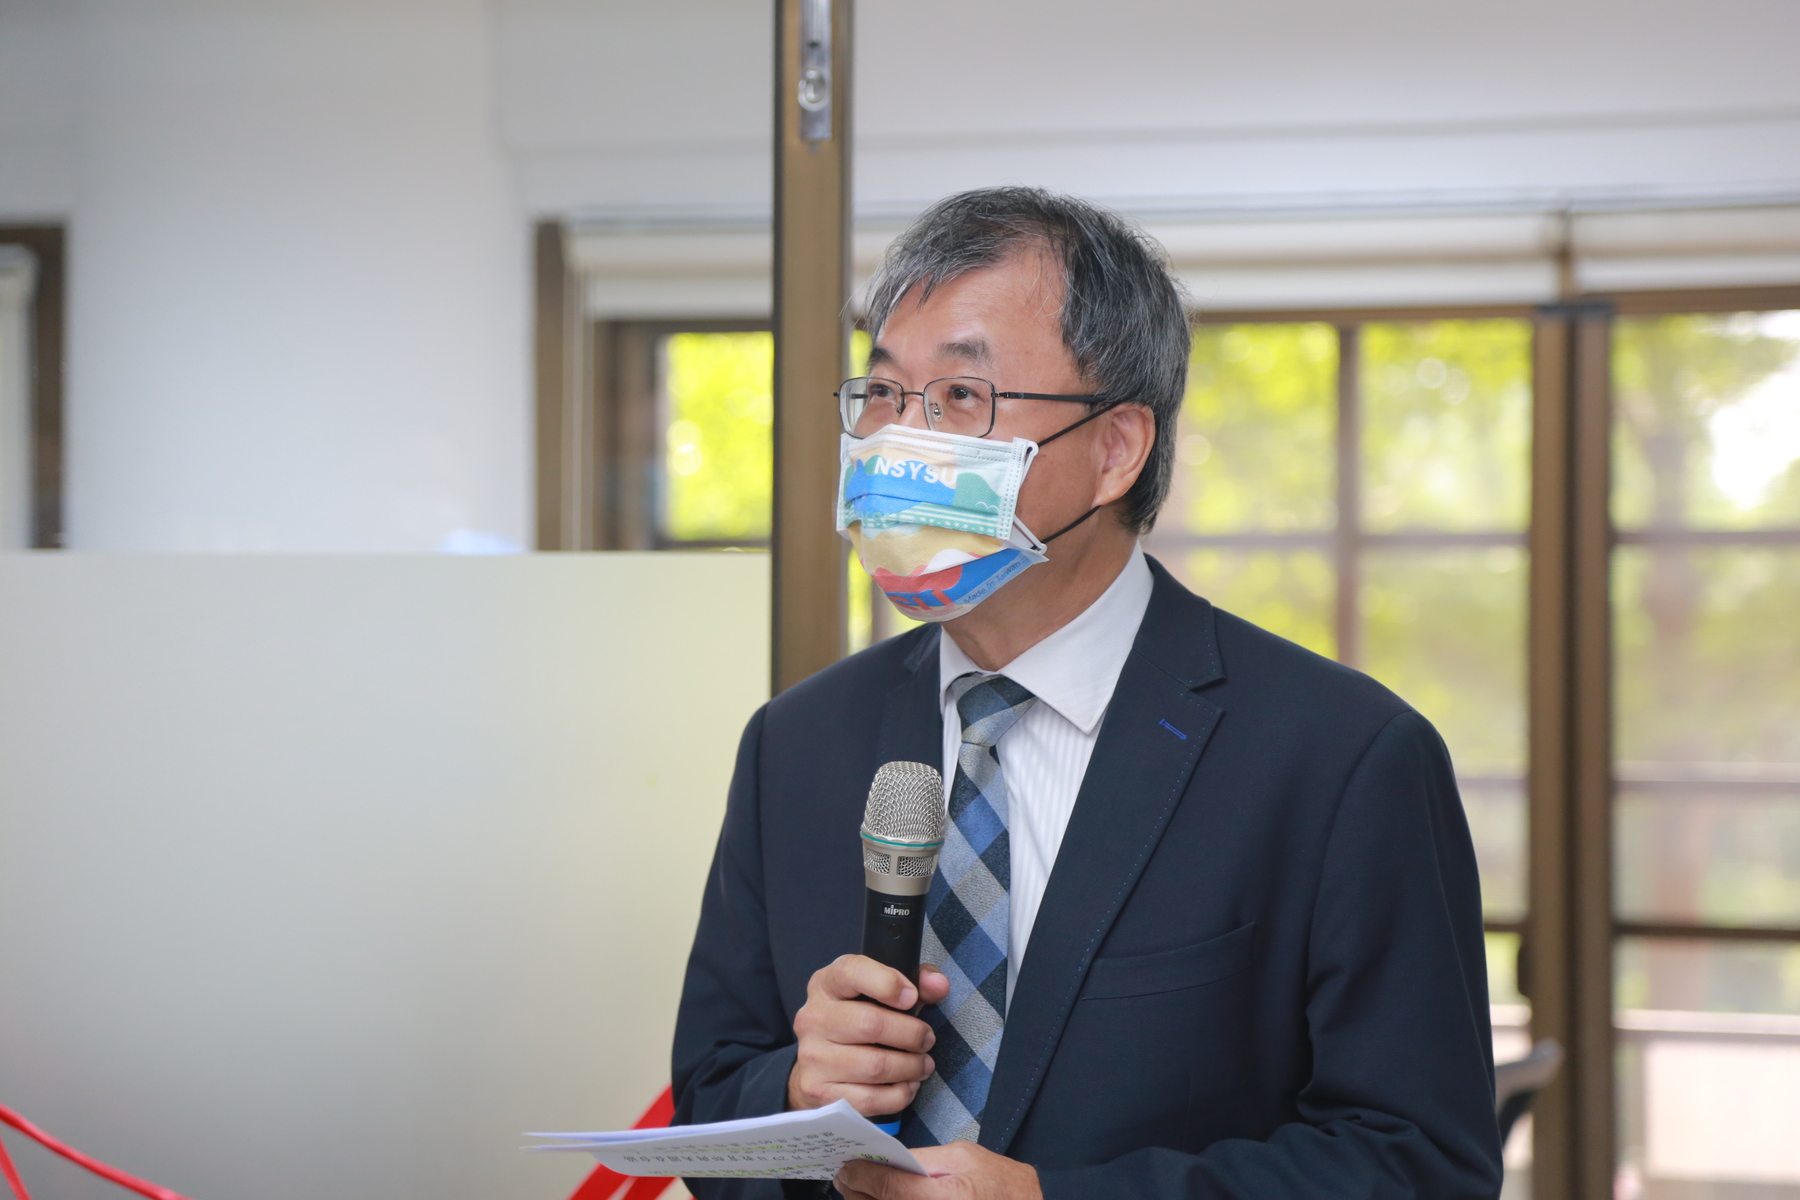 NSYSU President Ying-Yao Cheng delivered a speech.